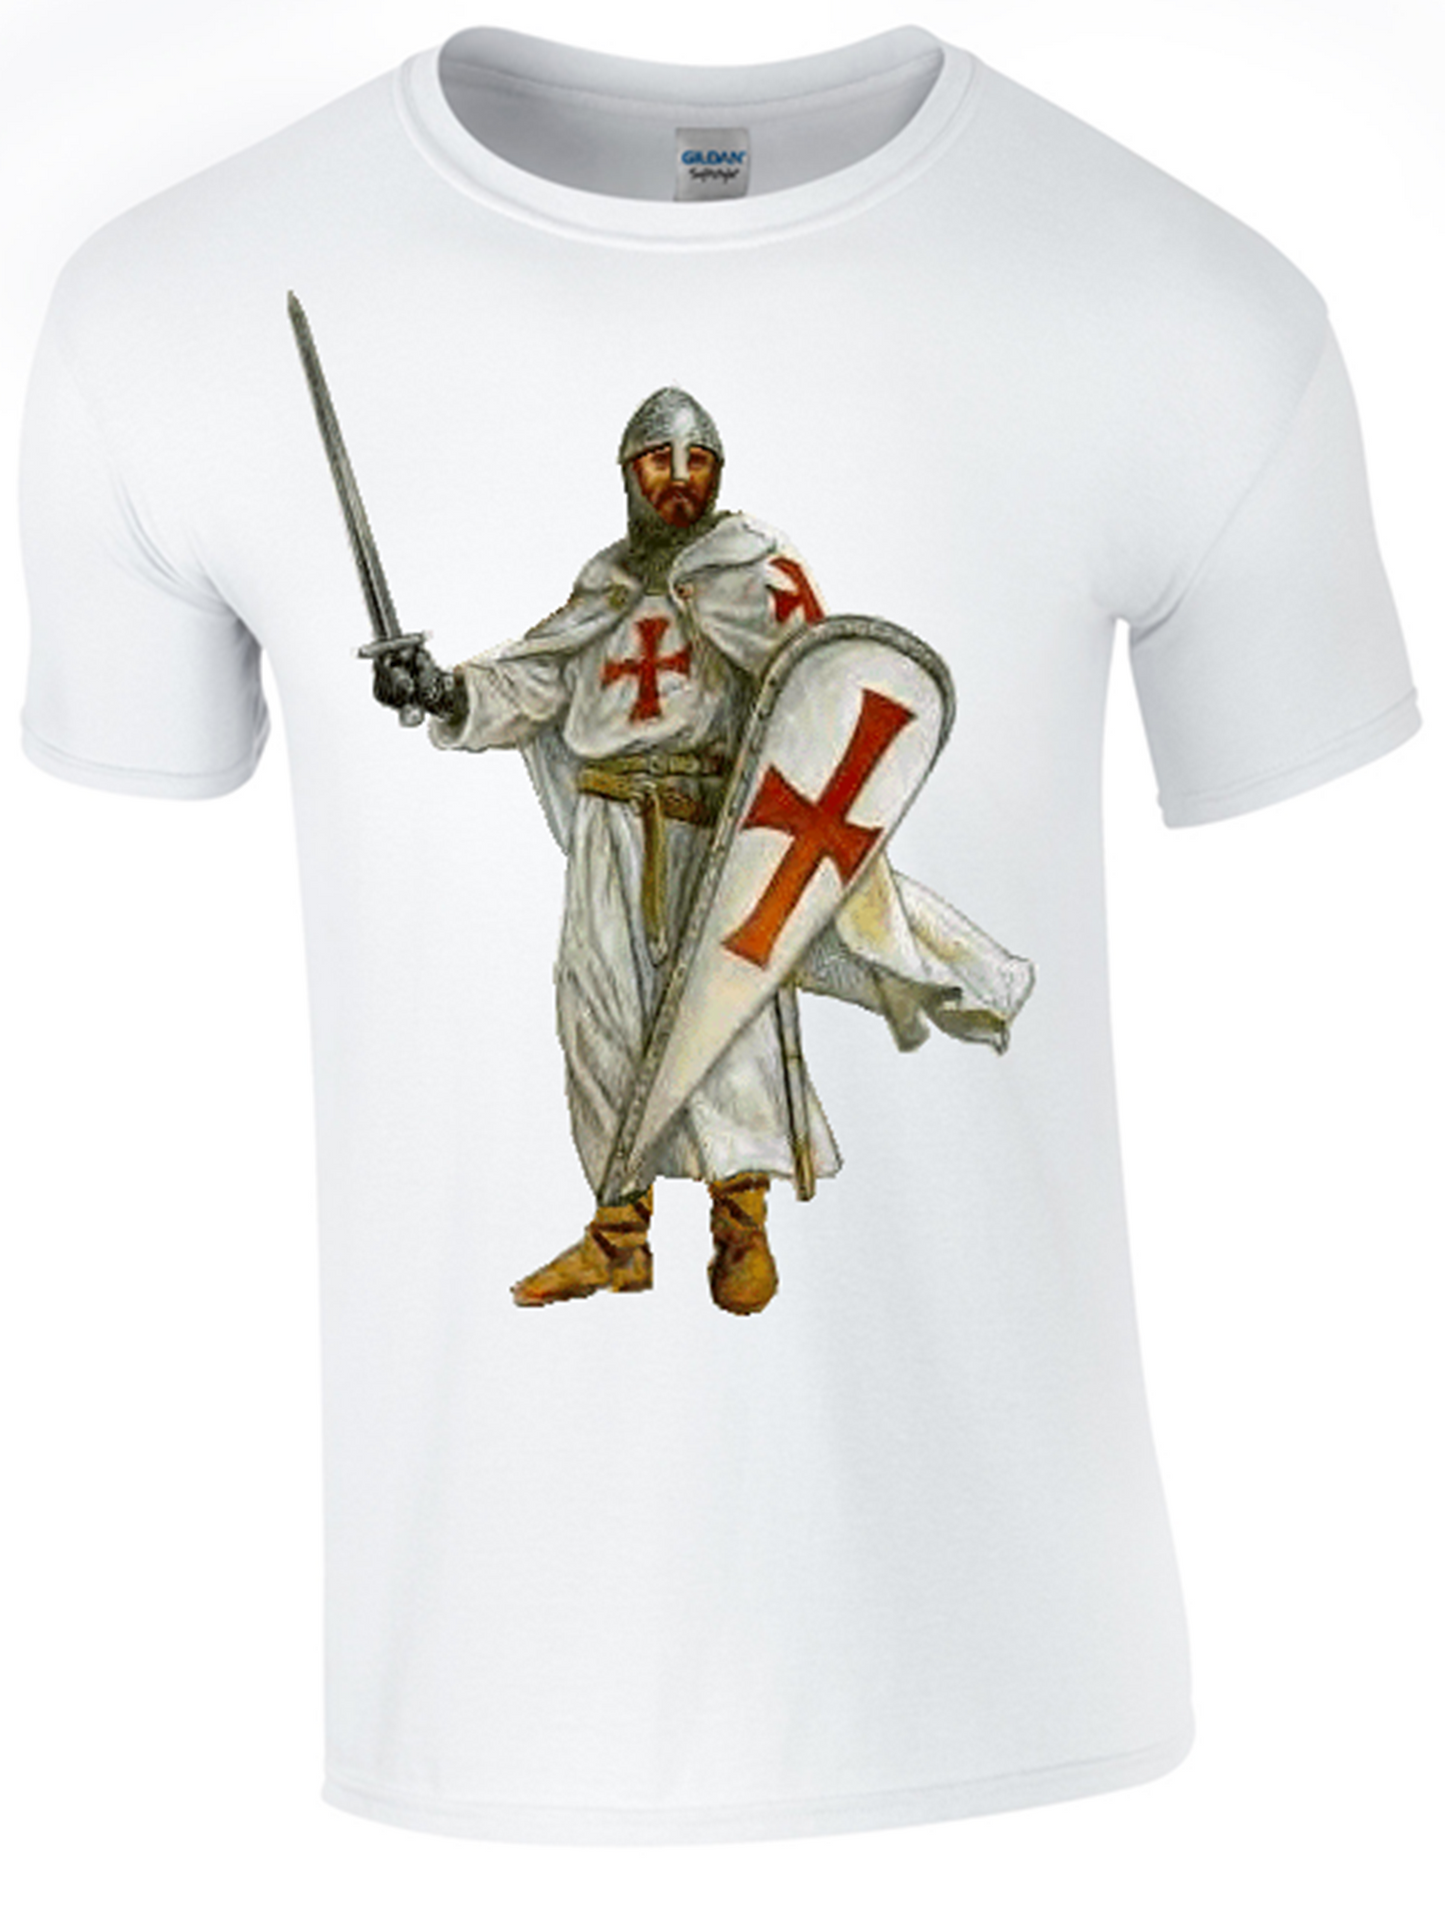 St George's Crusader, black & white T-Shirt Printed DTG (Direct to Garment) for a Permanent Finish. - Army 1157 kit S / White Army 1157 Kit Veterans Owned Business